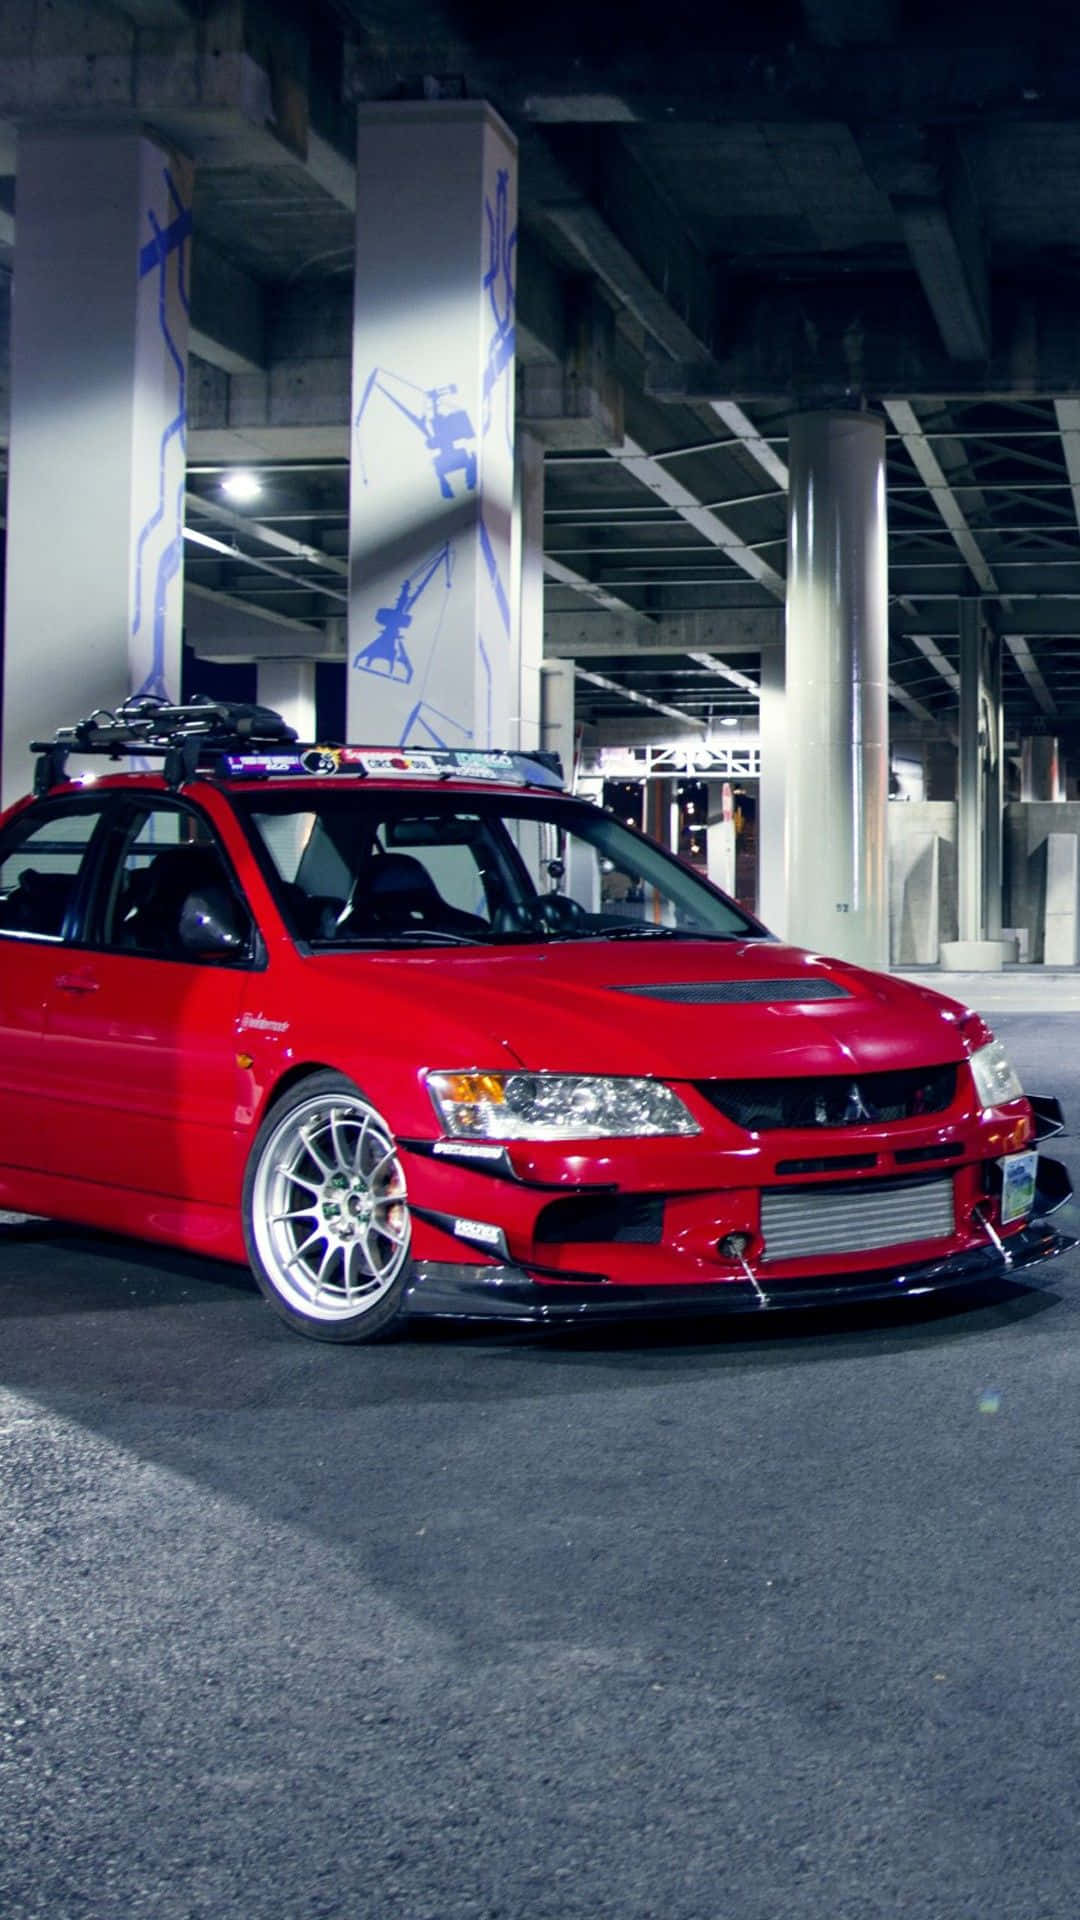 Add some JDM Style to Your iPhone Wallpaper